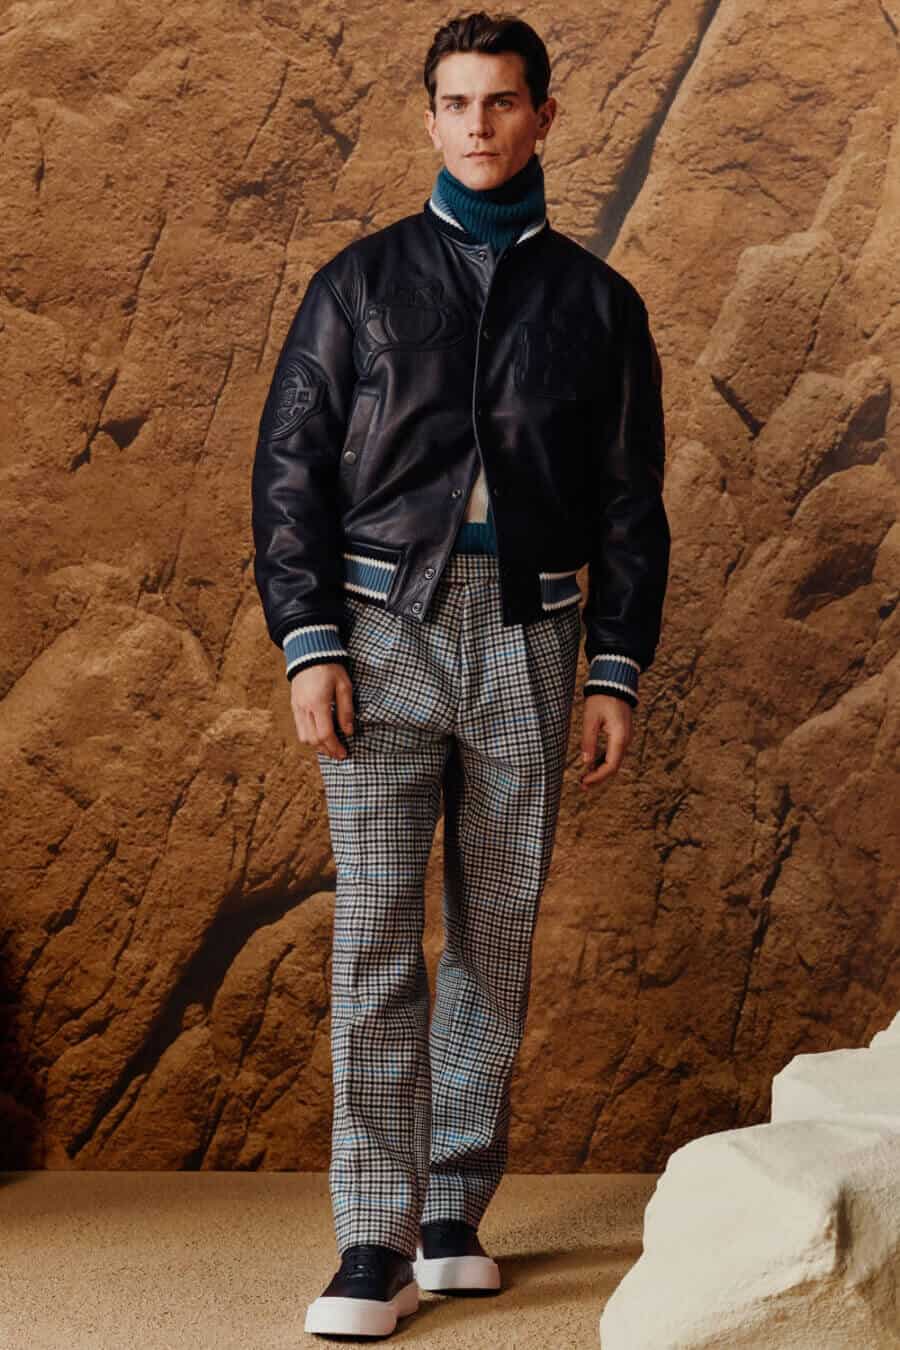 Men's leather varsity jacket, roll neck, pleated trousers and sneakers outfit